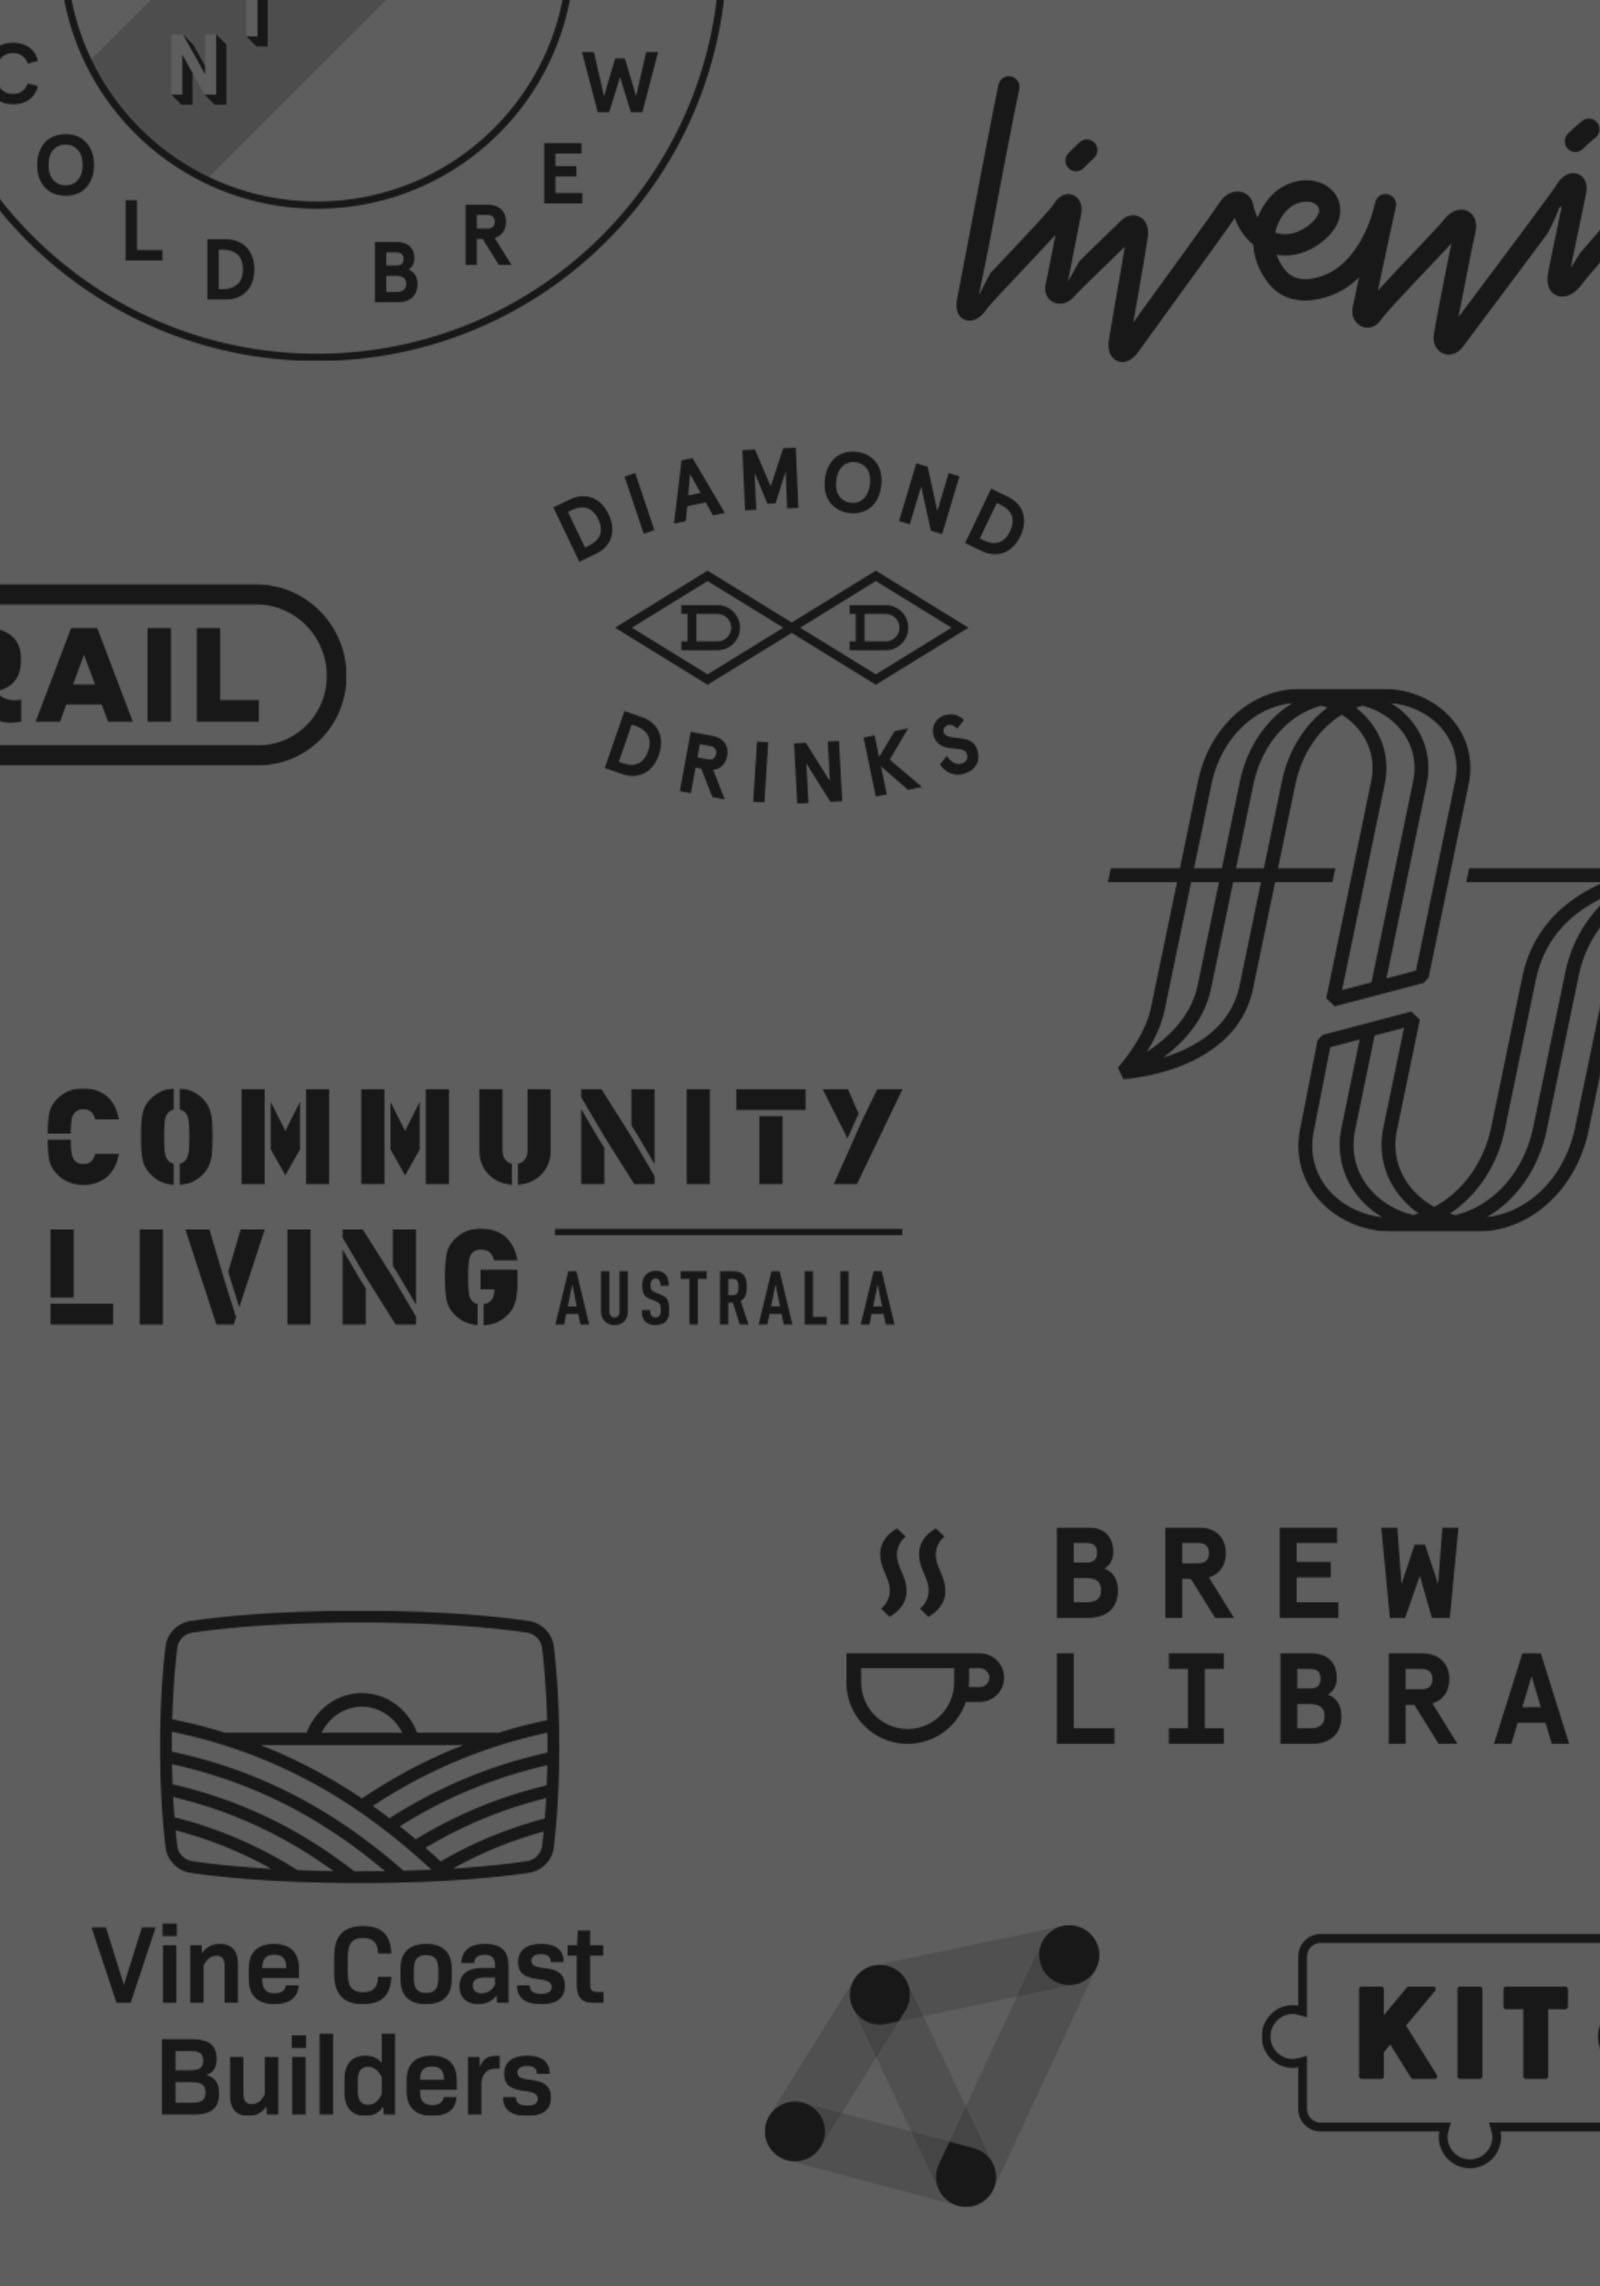 A collection of logos developed by Sam Jusaitis.